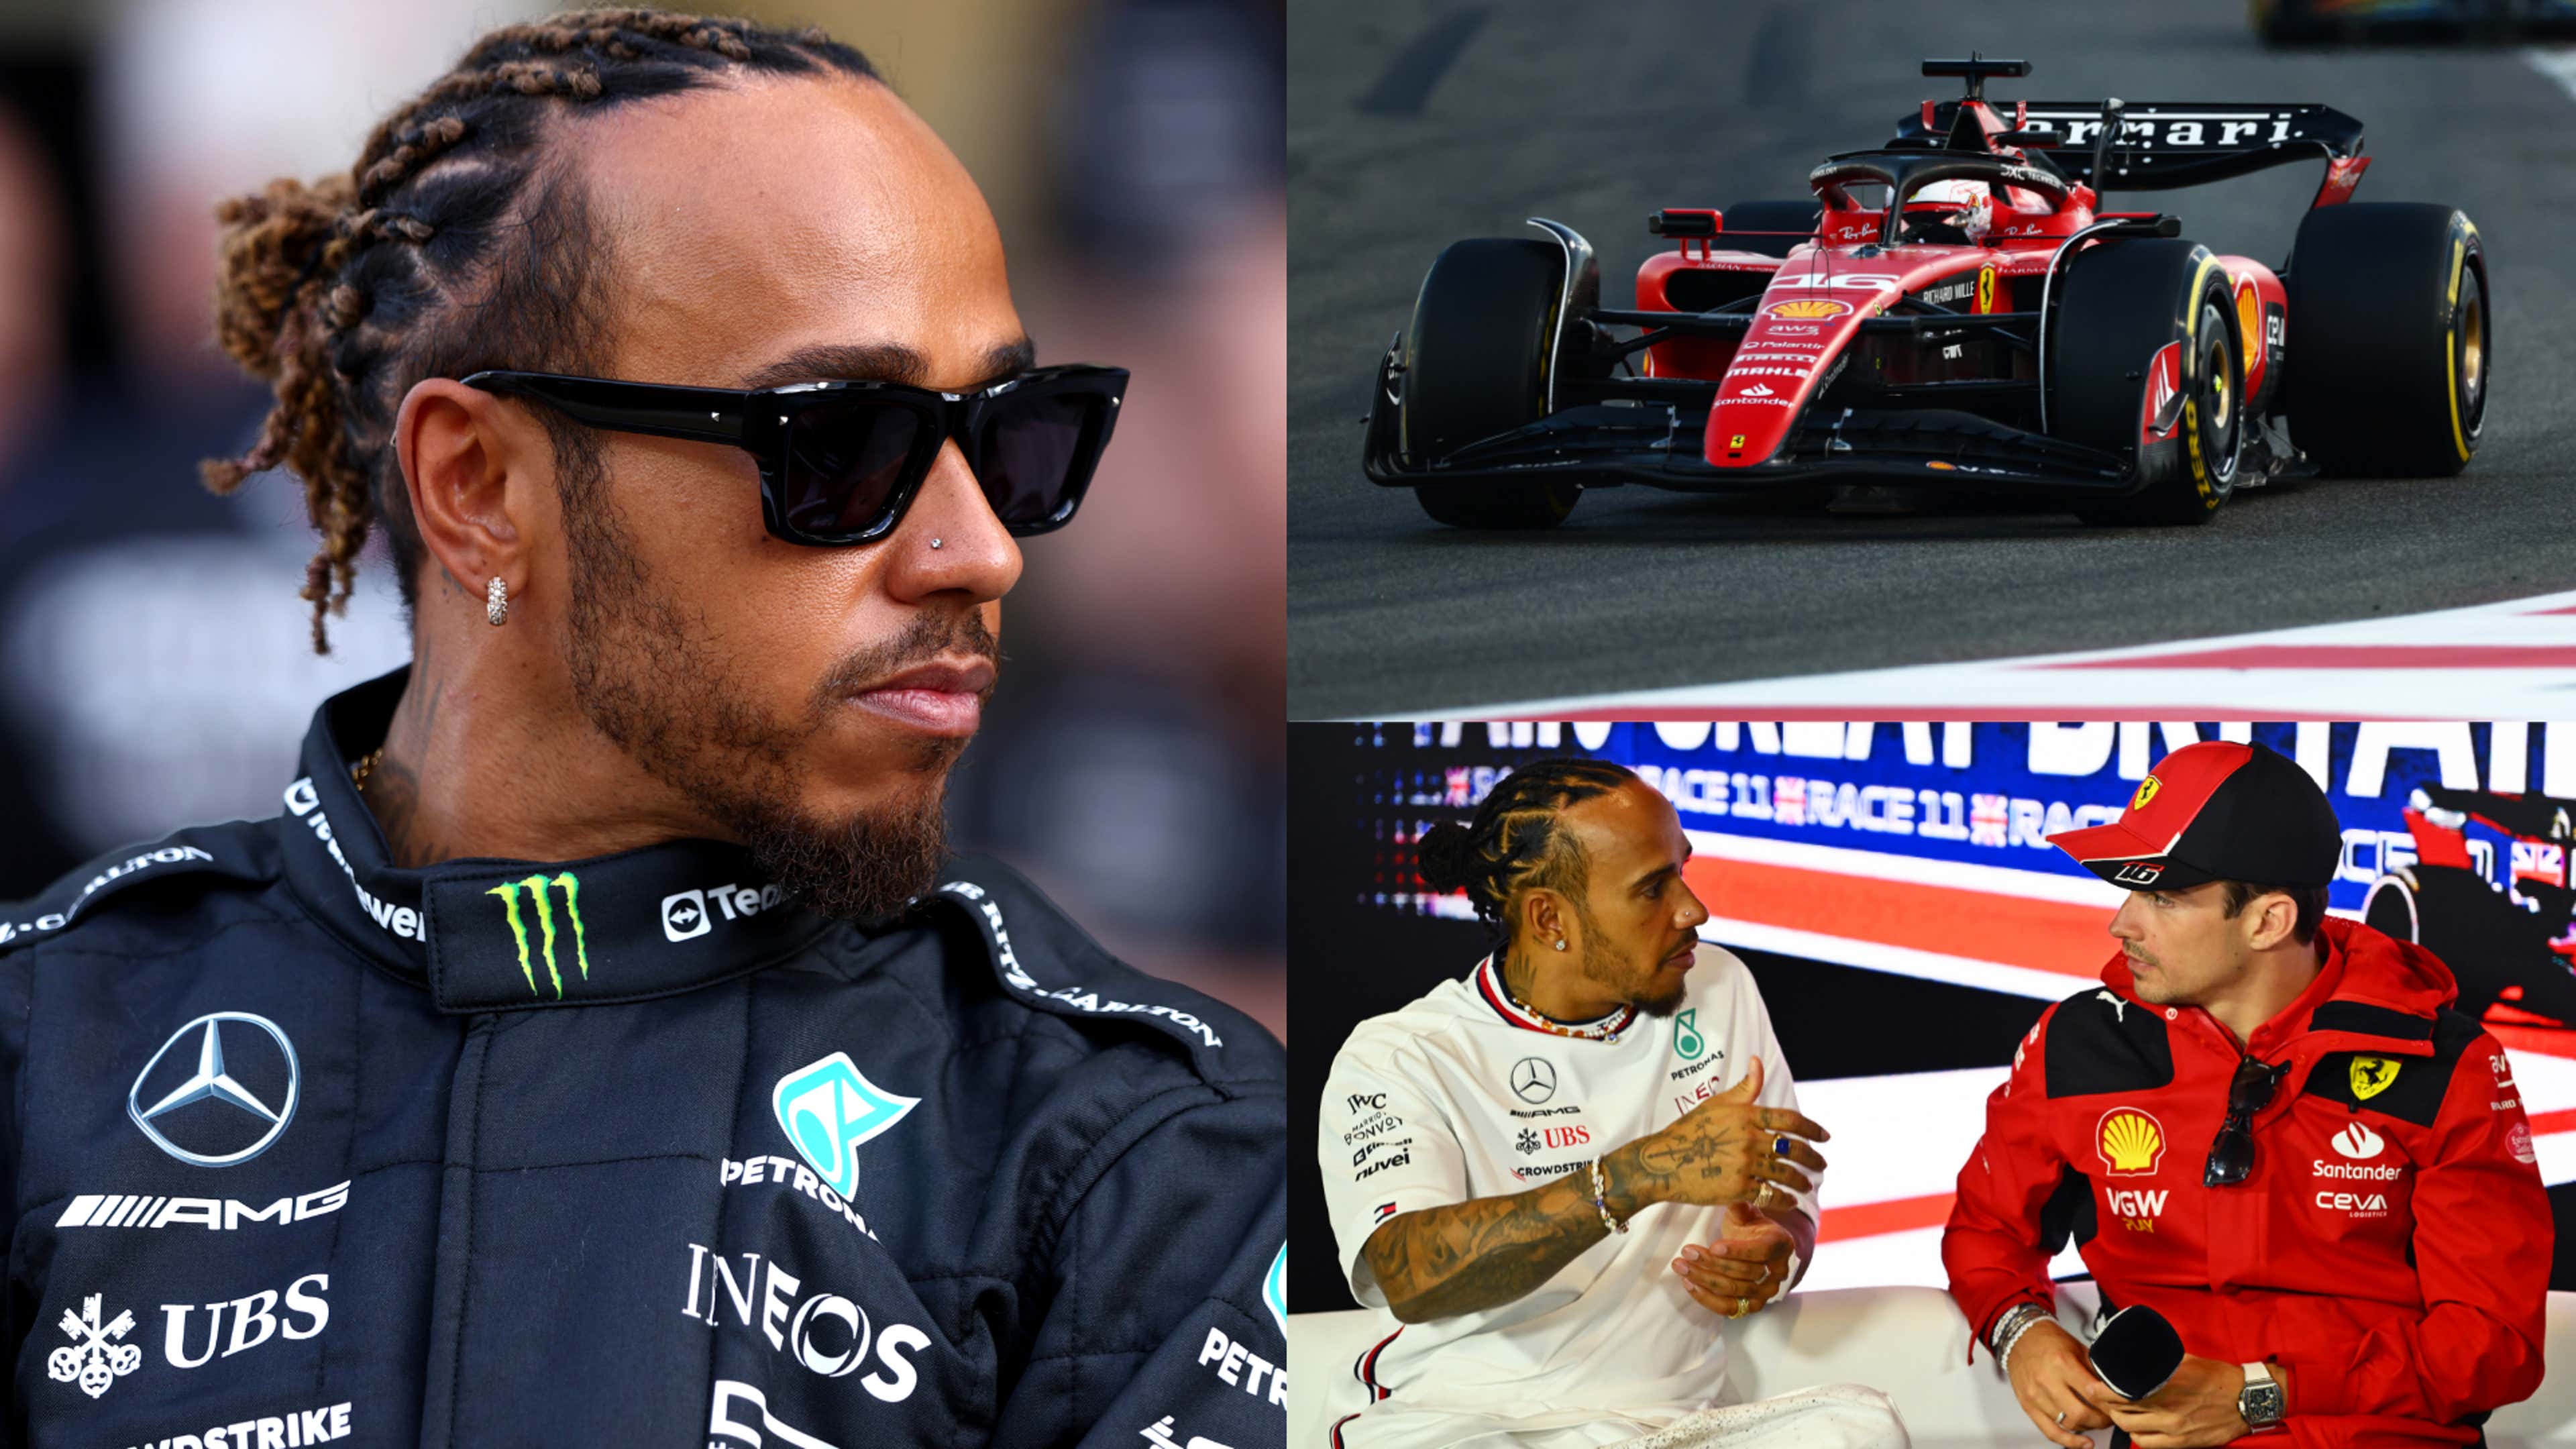 Biggest deadline day transfer! F1 star Lewis Hamilton steals football's  spotlight with bombshell move from Mercedes to rivals Ferrari